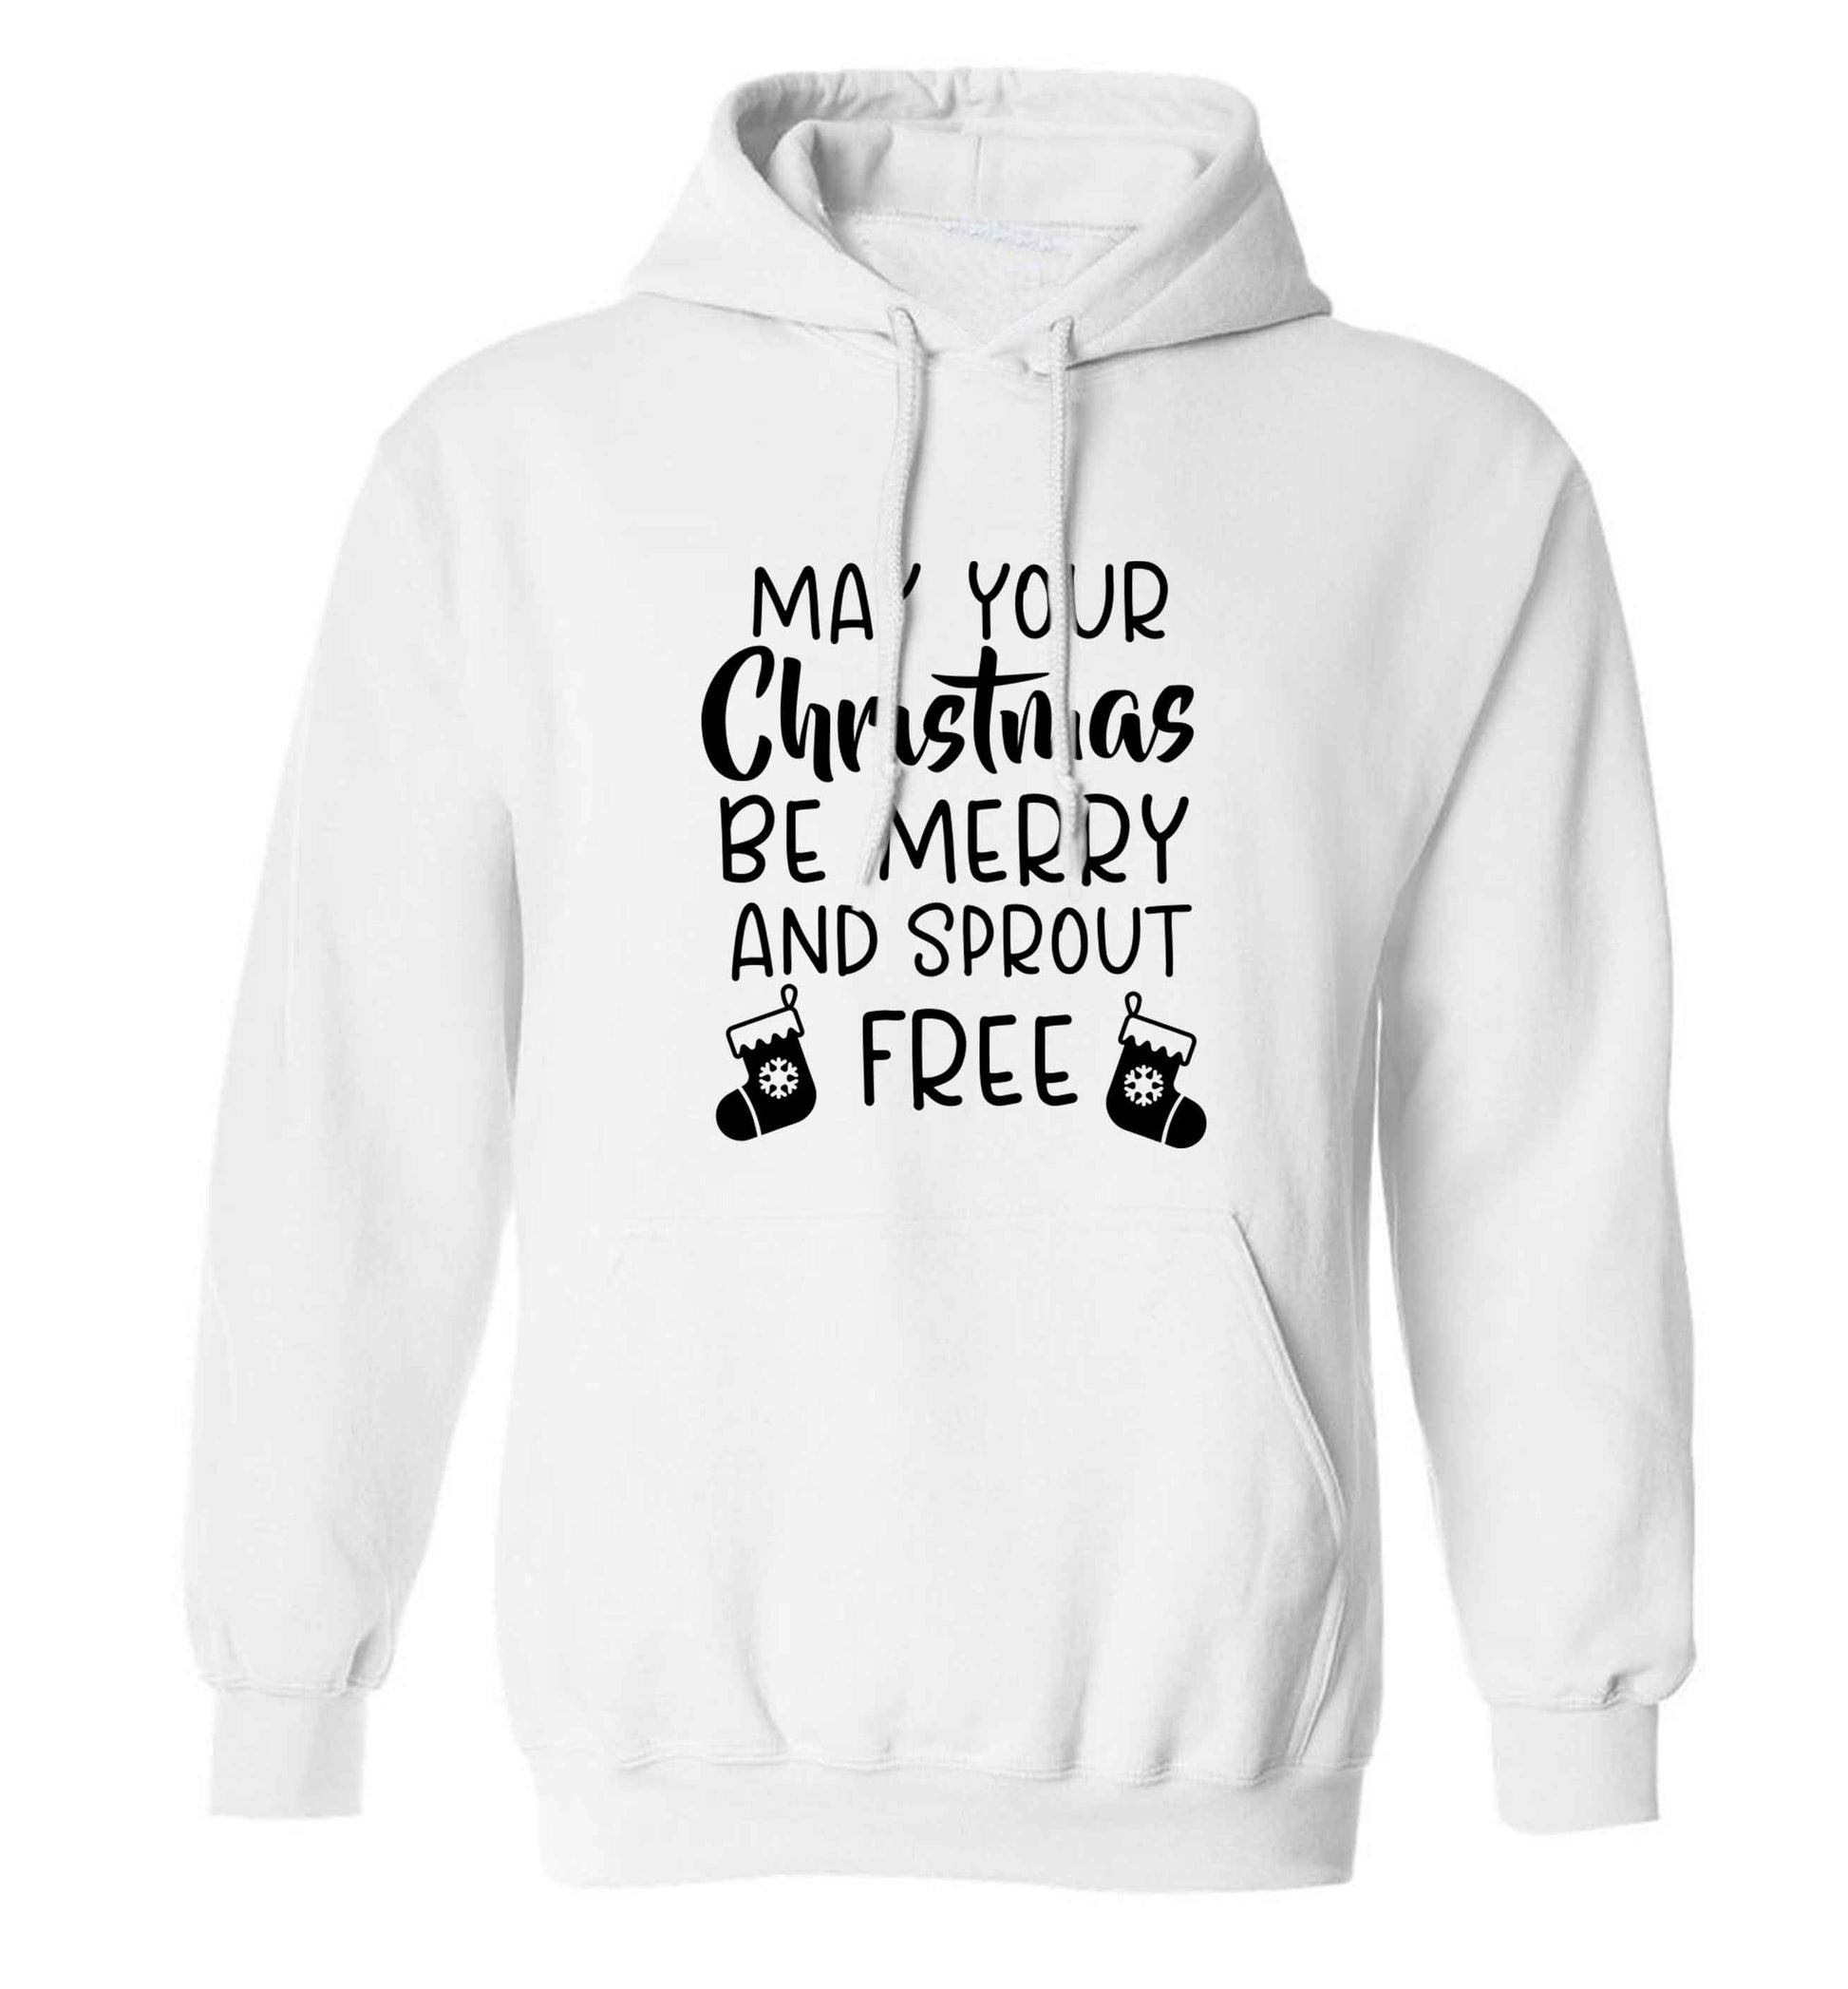 May your Christmas be merry and sprout free adults unisex white hoodie 2XL